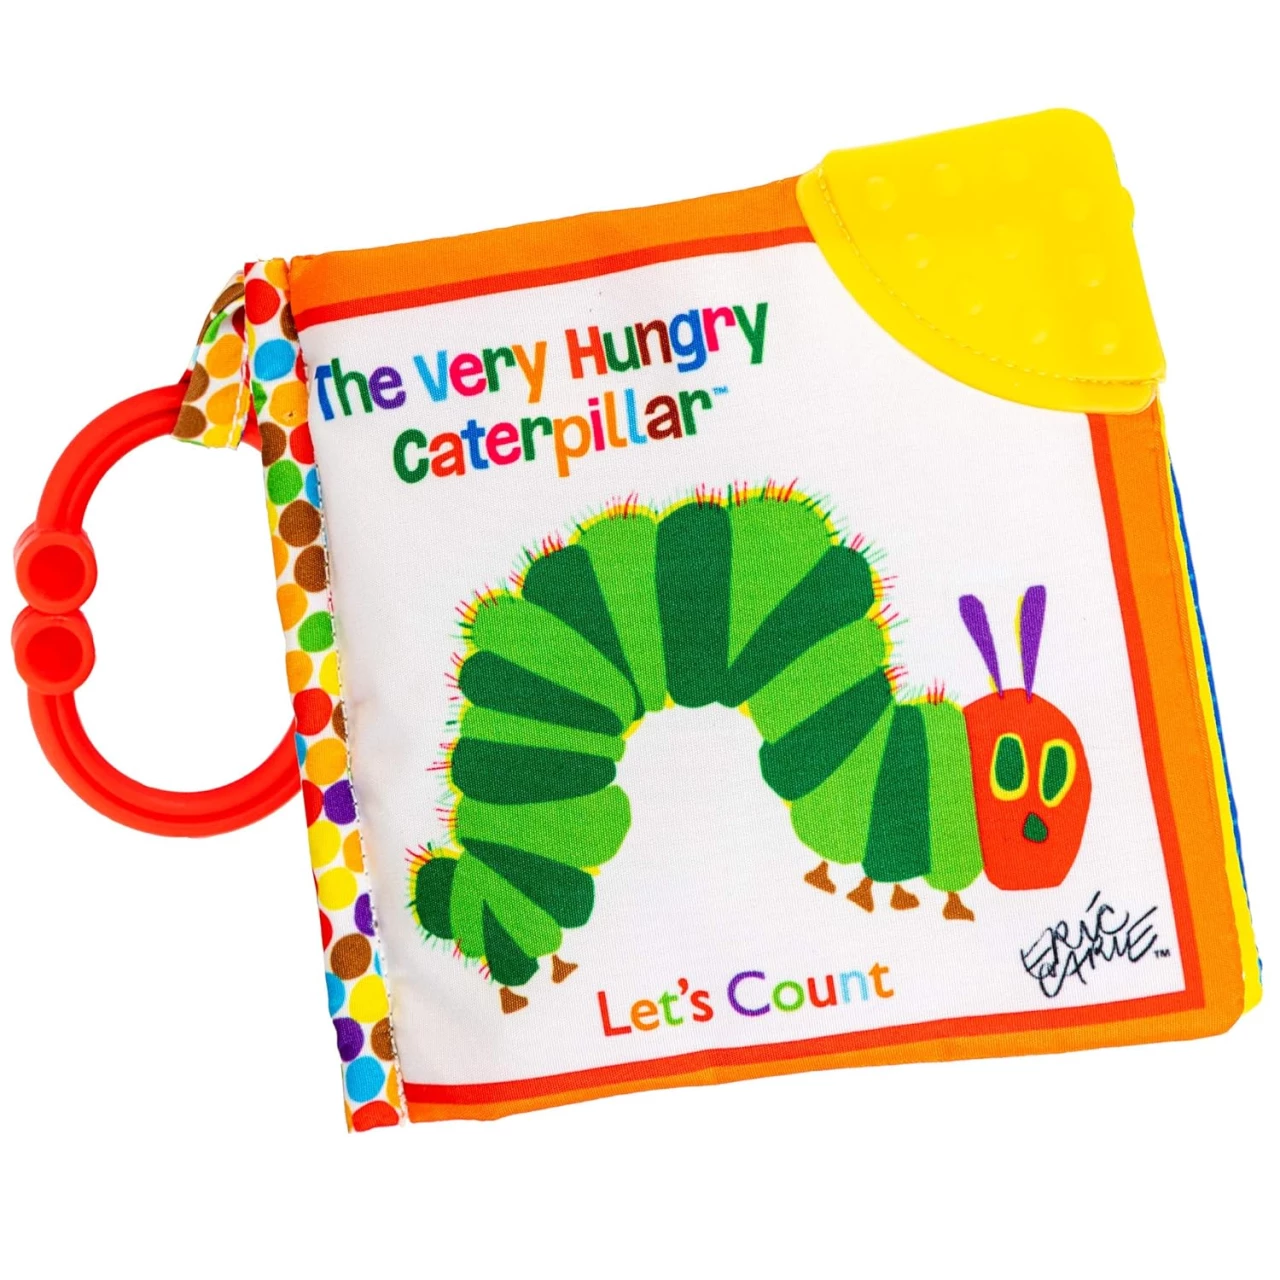 Let&rsquo;s Count Soft Book - World of Eric Carle the Very Hungry Caterpillar Baby on the Go Clip Teething Crinkle Soft Sensory Book for Babies, 5.25x5.25 Inch